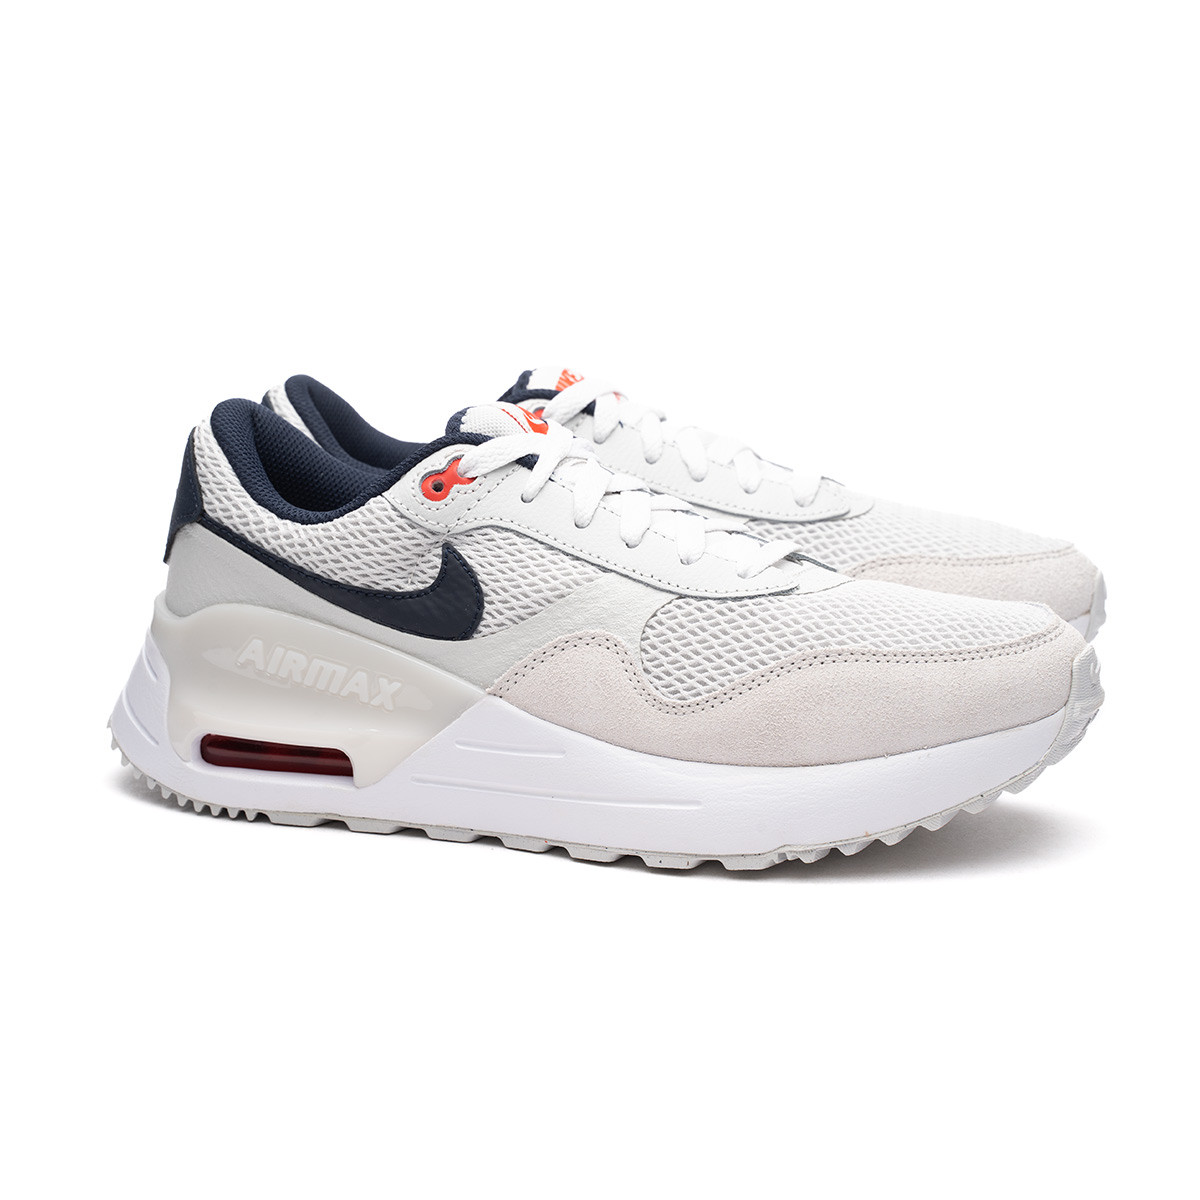 Nike Chaussures Homme - Air Max SYSTM - photon dust/obsidian-white-tra  DM9537-013